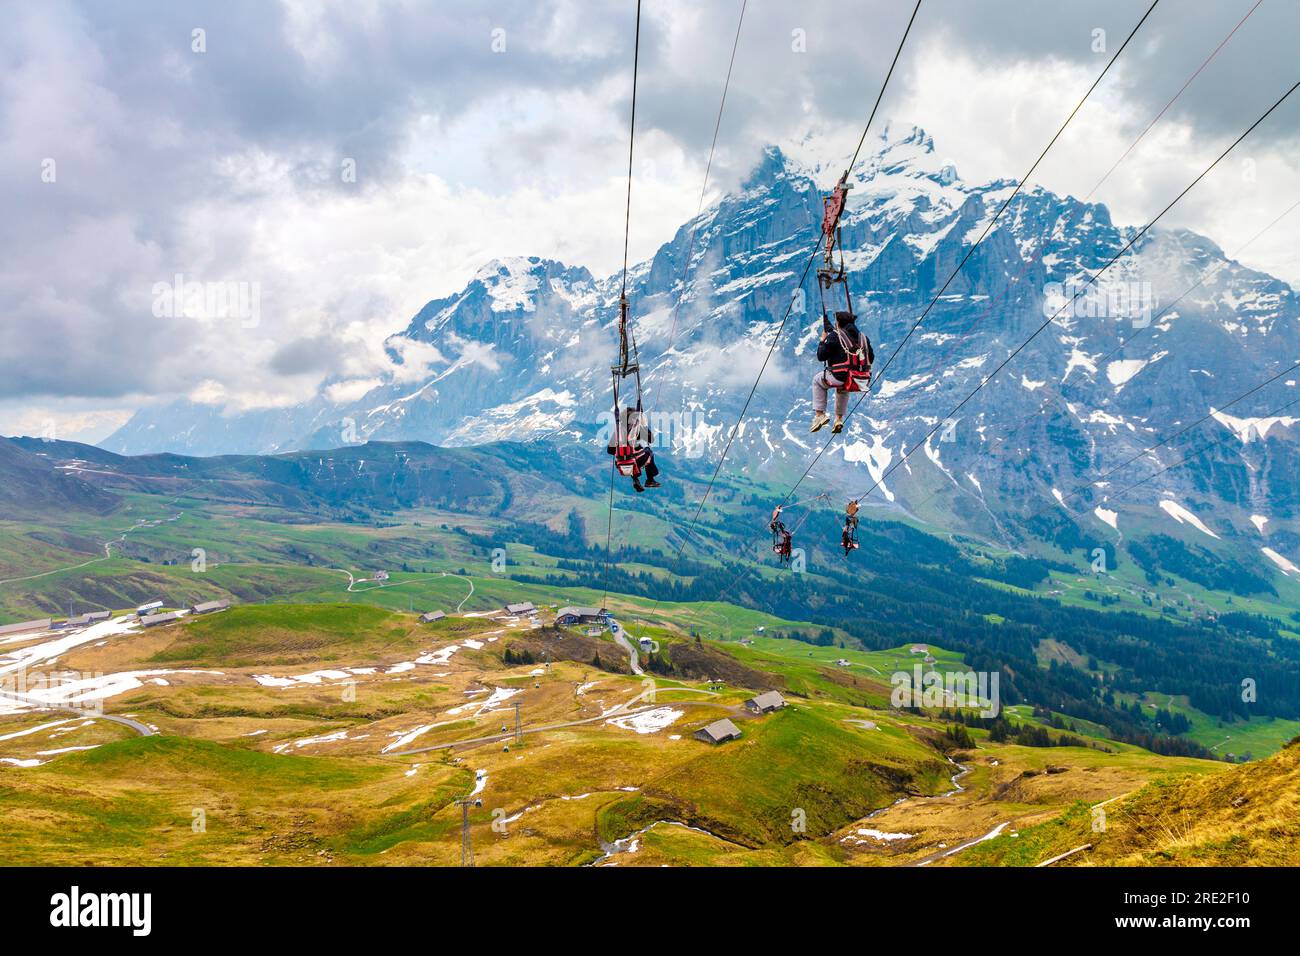 People on the First Flyer zip line at the summit of First mountain, Wetterhorn in background, Switzerland Stock Photo